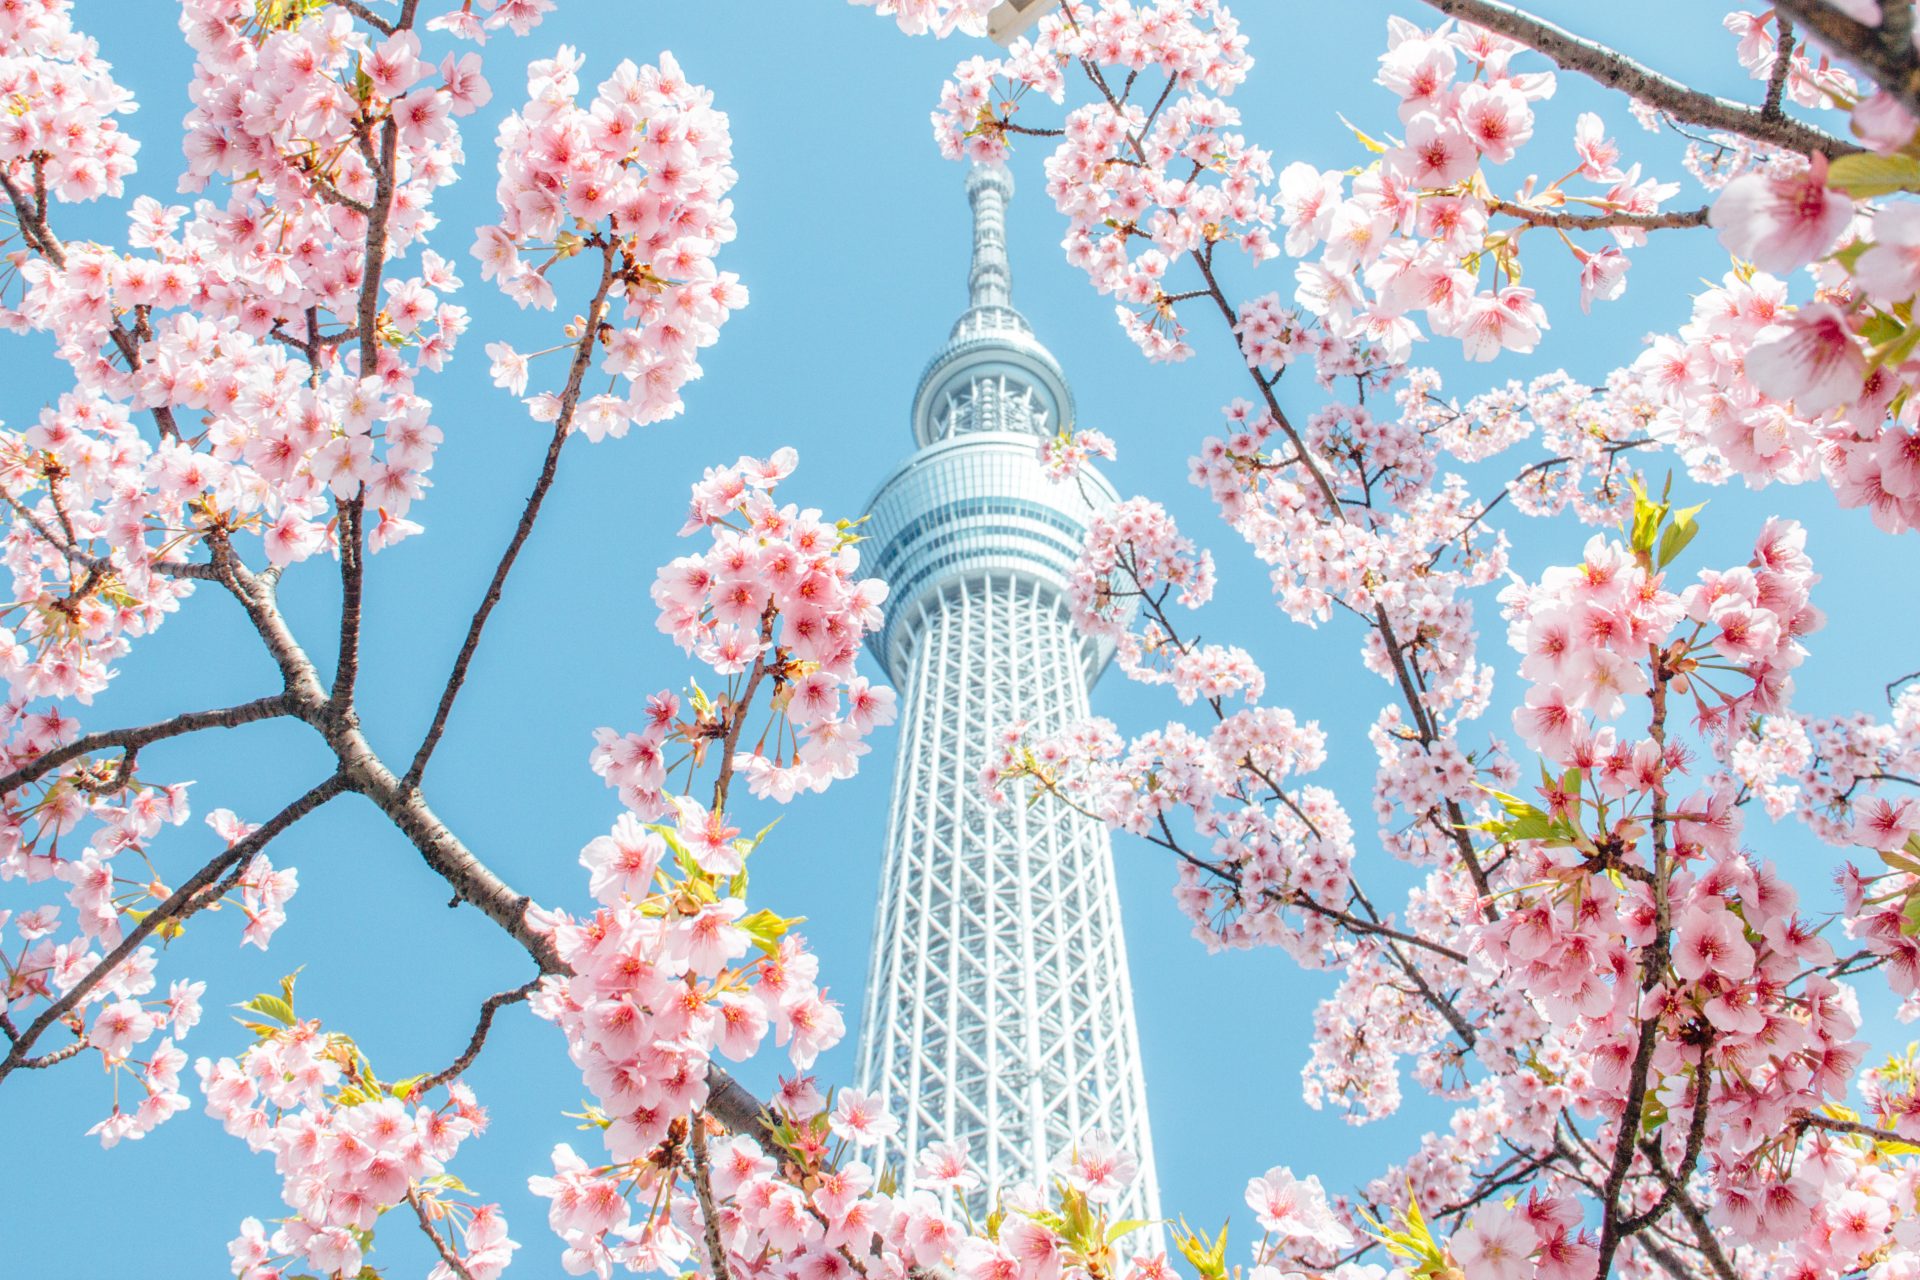 Tokyo's cherry blossoms are expected to bloom on March 19